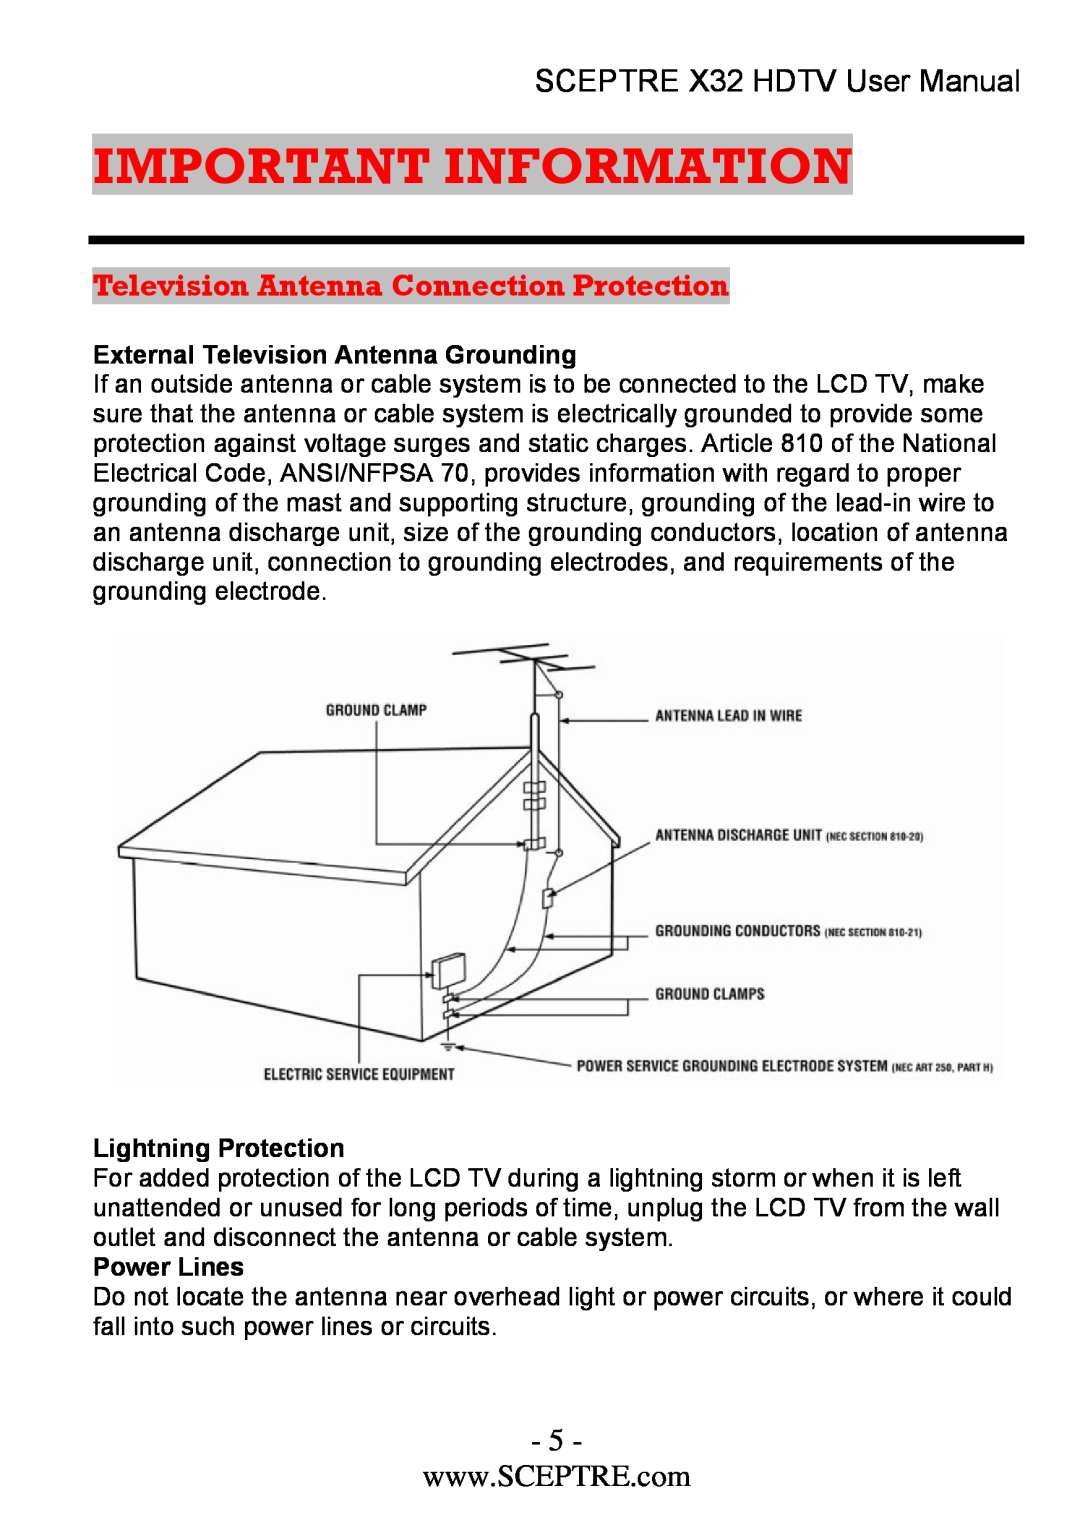 Sceptre Technologies x32 Television Antenna Connection Protection, Important Information, SCEPTRE X32 HDTV User Manual 